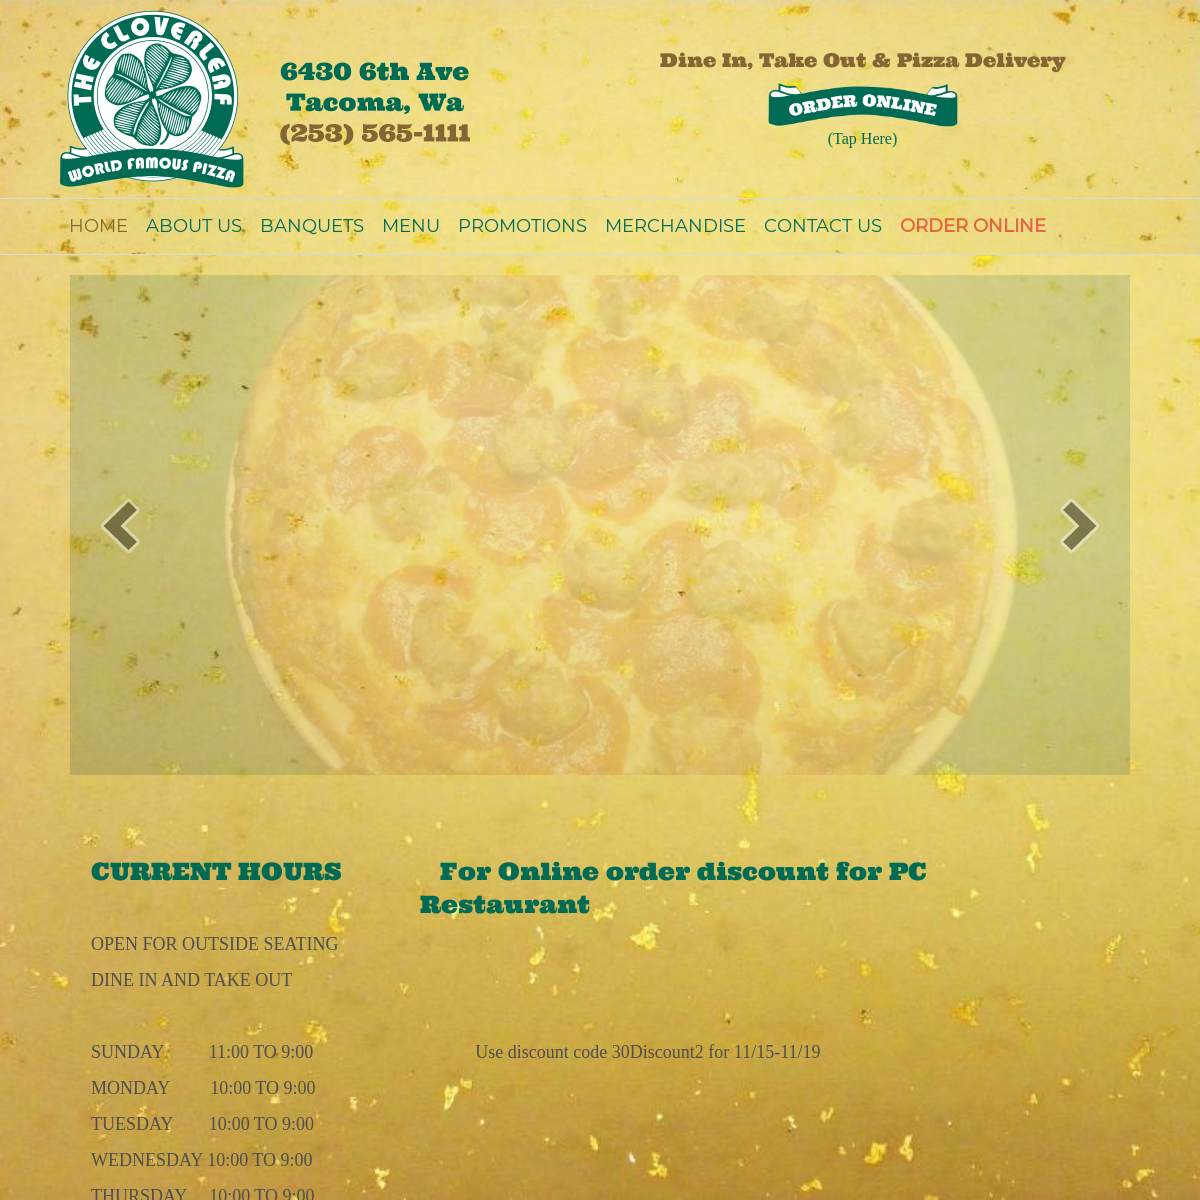 A complete backup of cloverleafpizza.com